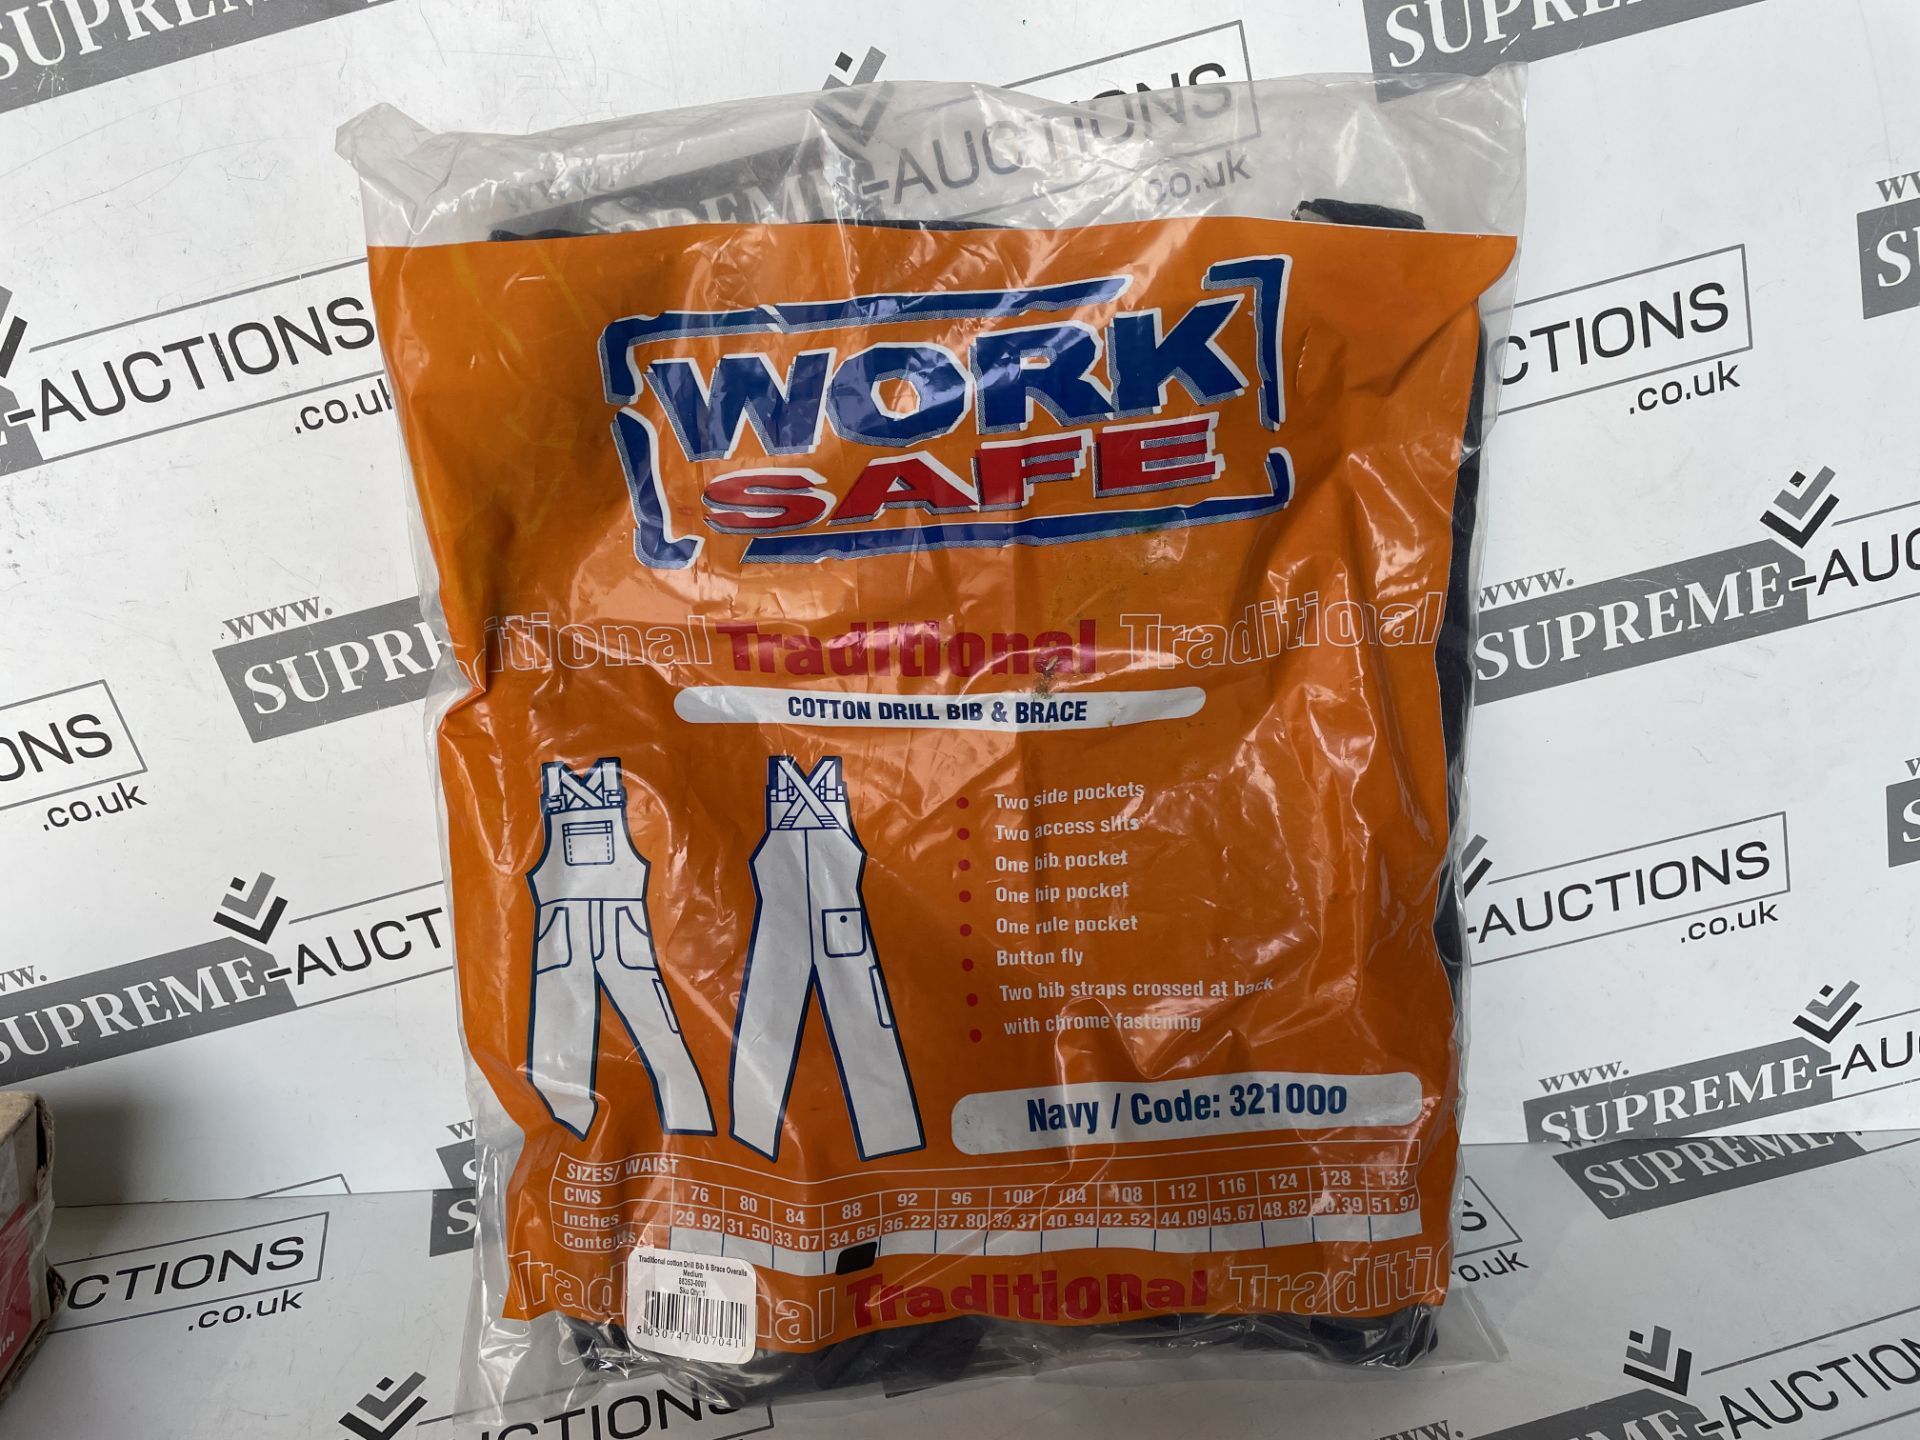 25 X BRAND NEW WORK SAFE TRADITIONAL NAVY COTTON DRILL BIB AND BRACE SIZE EXTRA LARGE R4.1/1.8